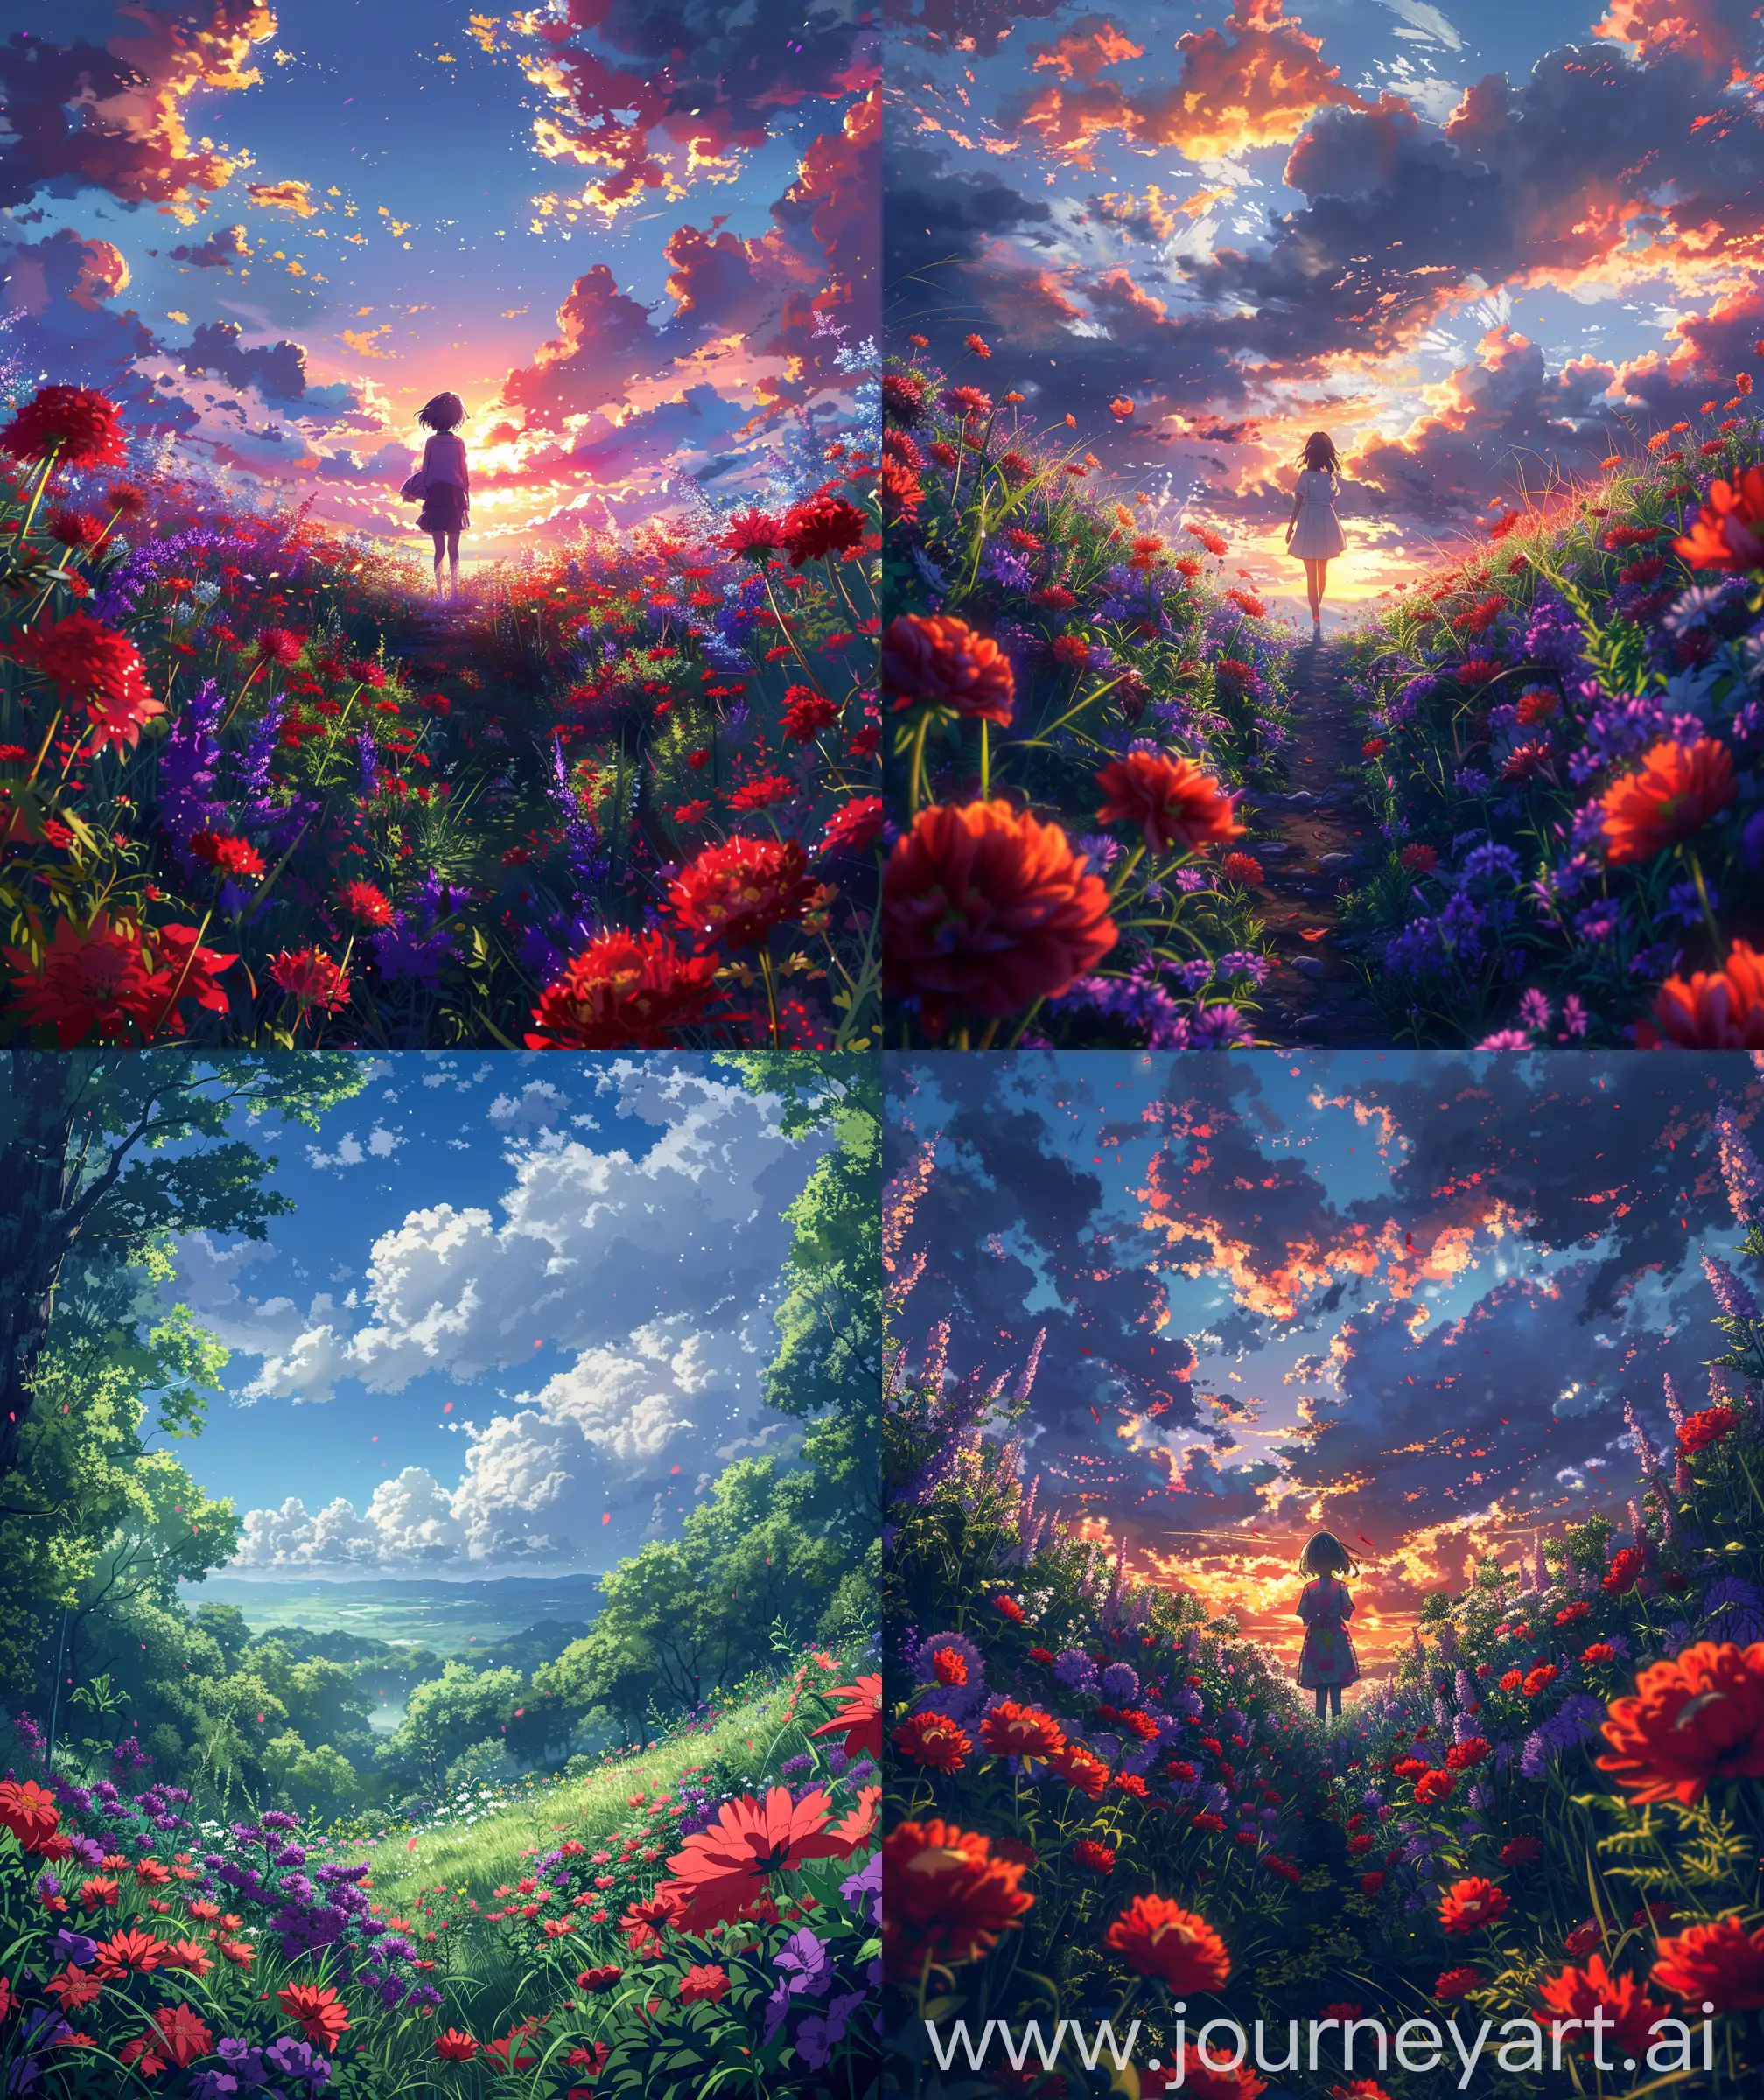 Childhood-Memories-in-Nature-Playful-Anime-Scenery-with-Flowers-and-Summer-Vibes